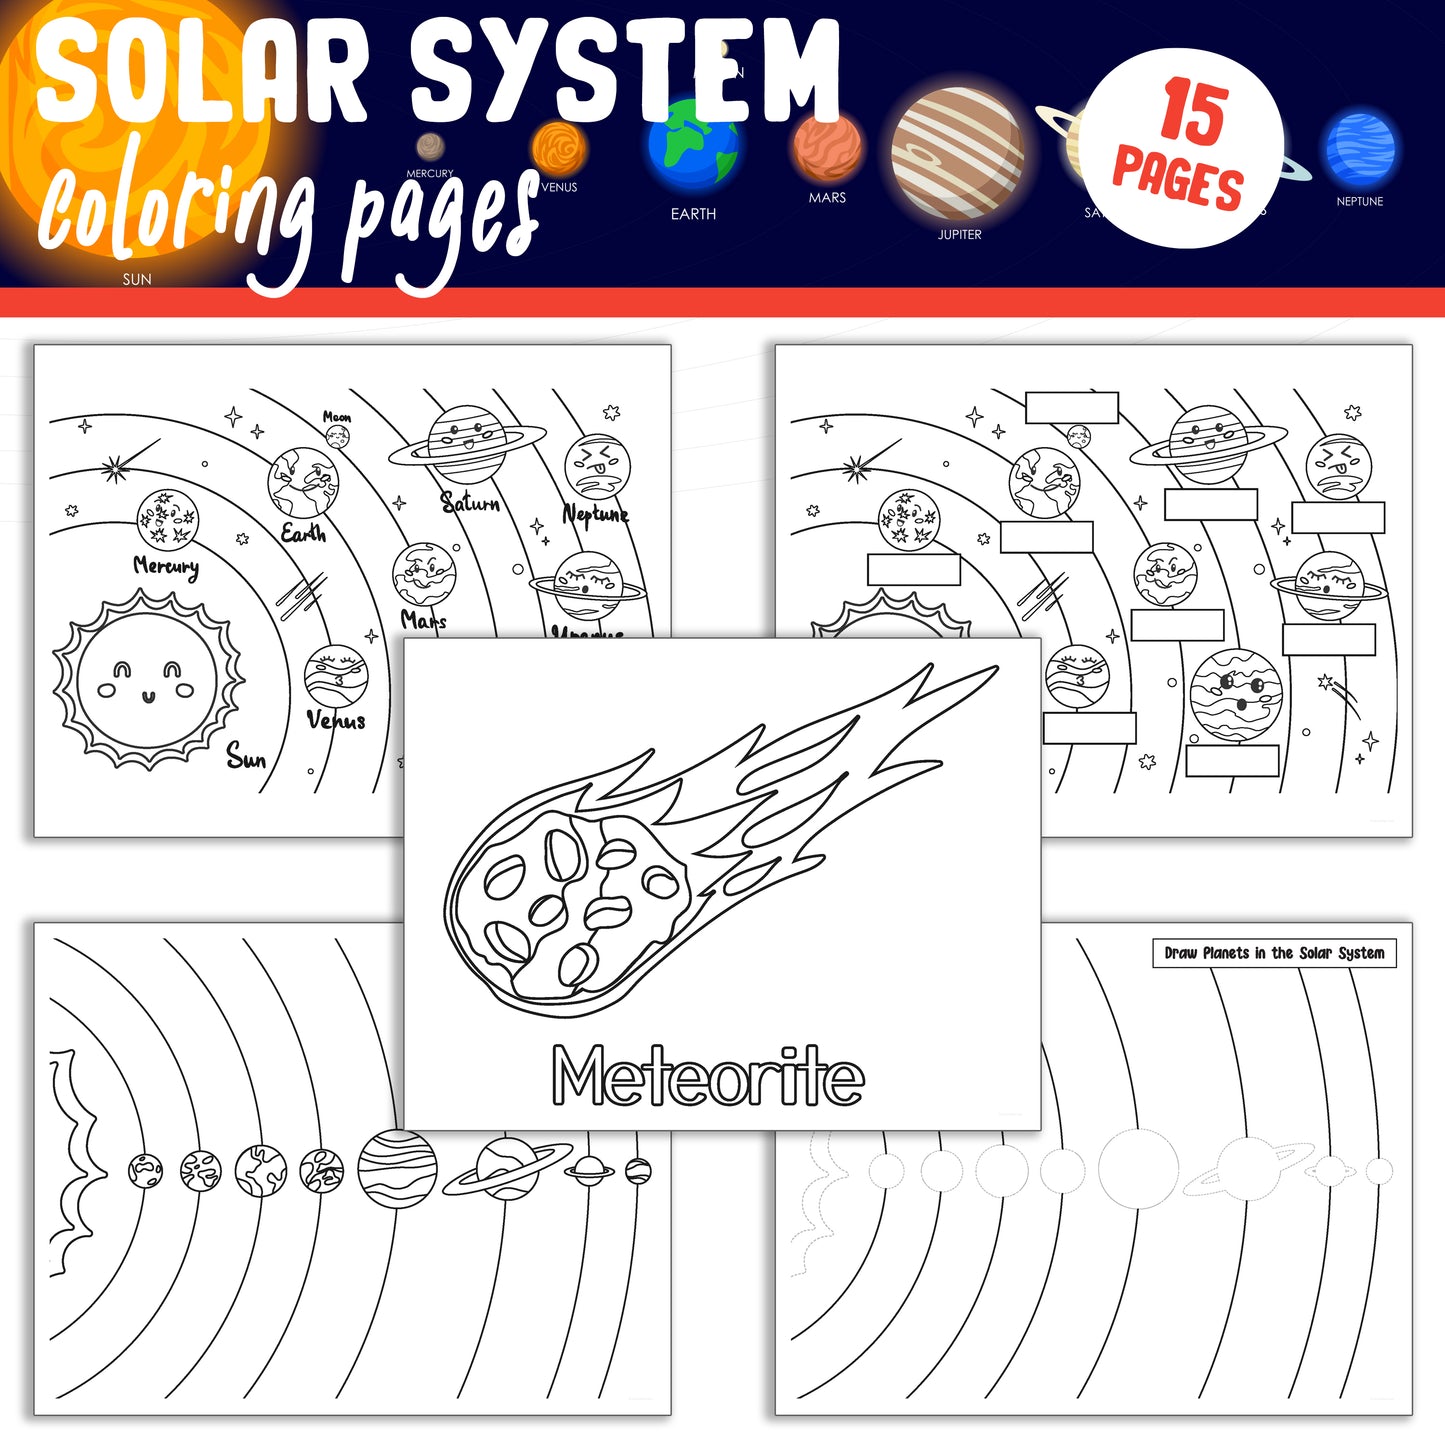 Solar System Coloring Pages: Color, Draw, and Name the Planets in the Solar System - 15 High-Resolution Pages, Instant PDF Download